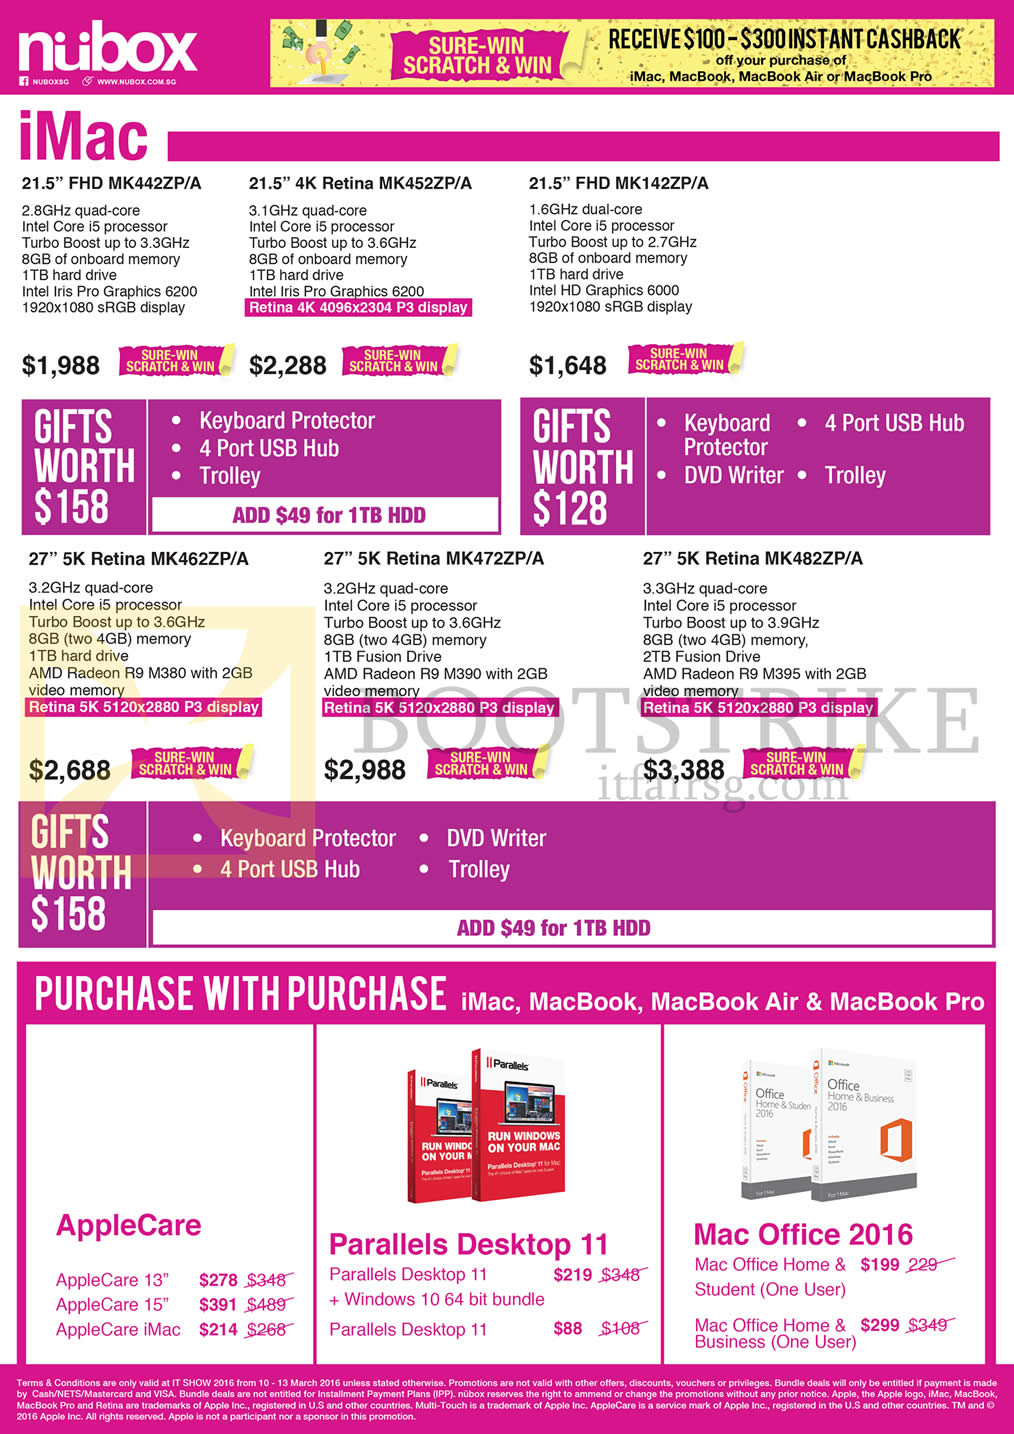 IT SHOW 2016 price list image brochure of Nubox IMac Desktop PC, Purchase With Purchase AppleCare, Parallel, Mac Office 2016